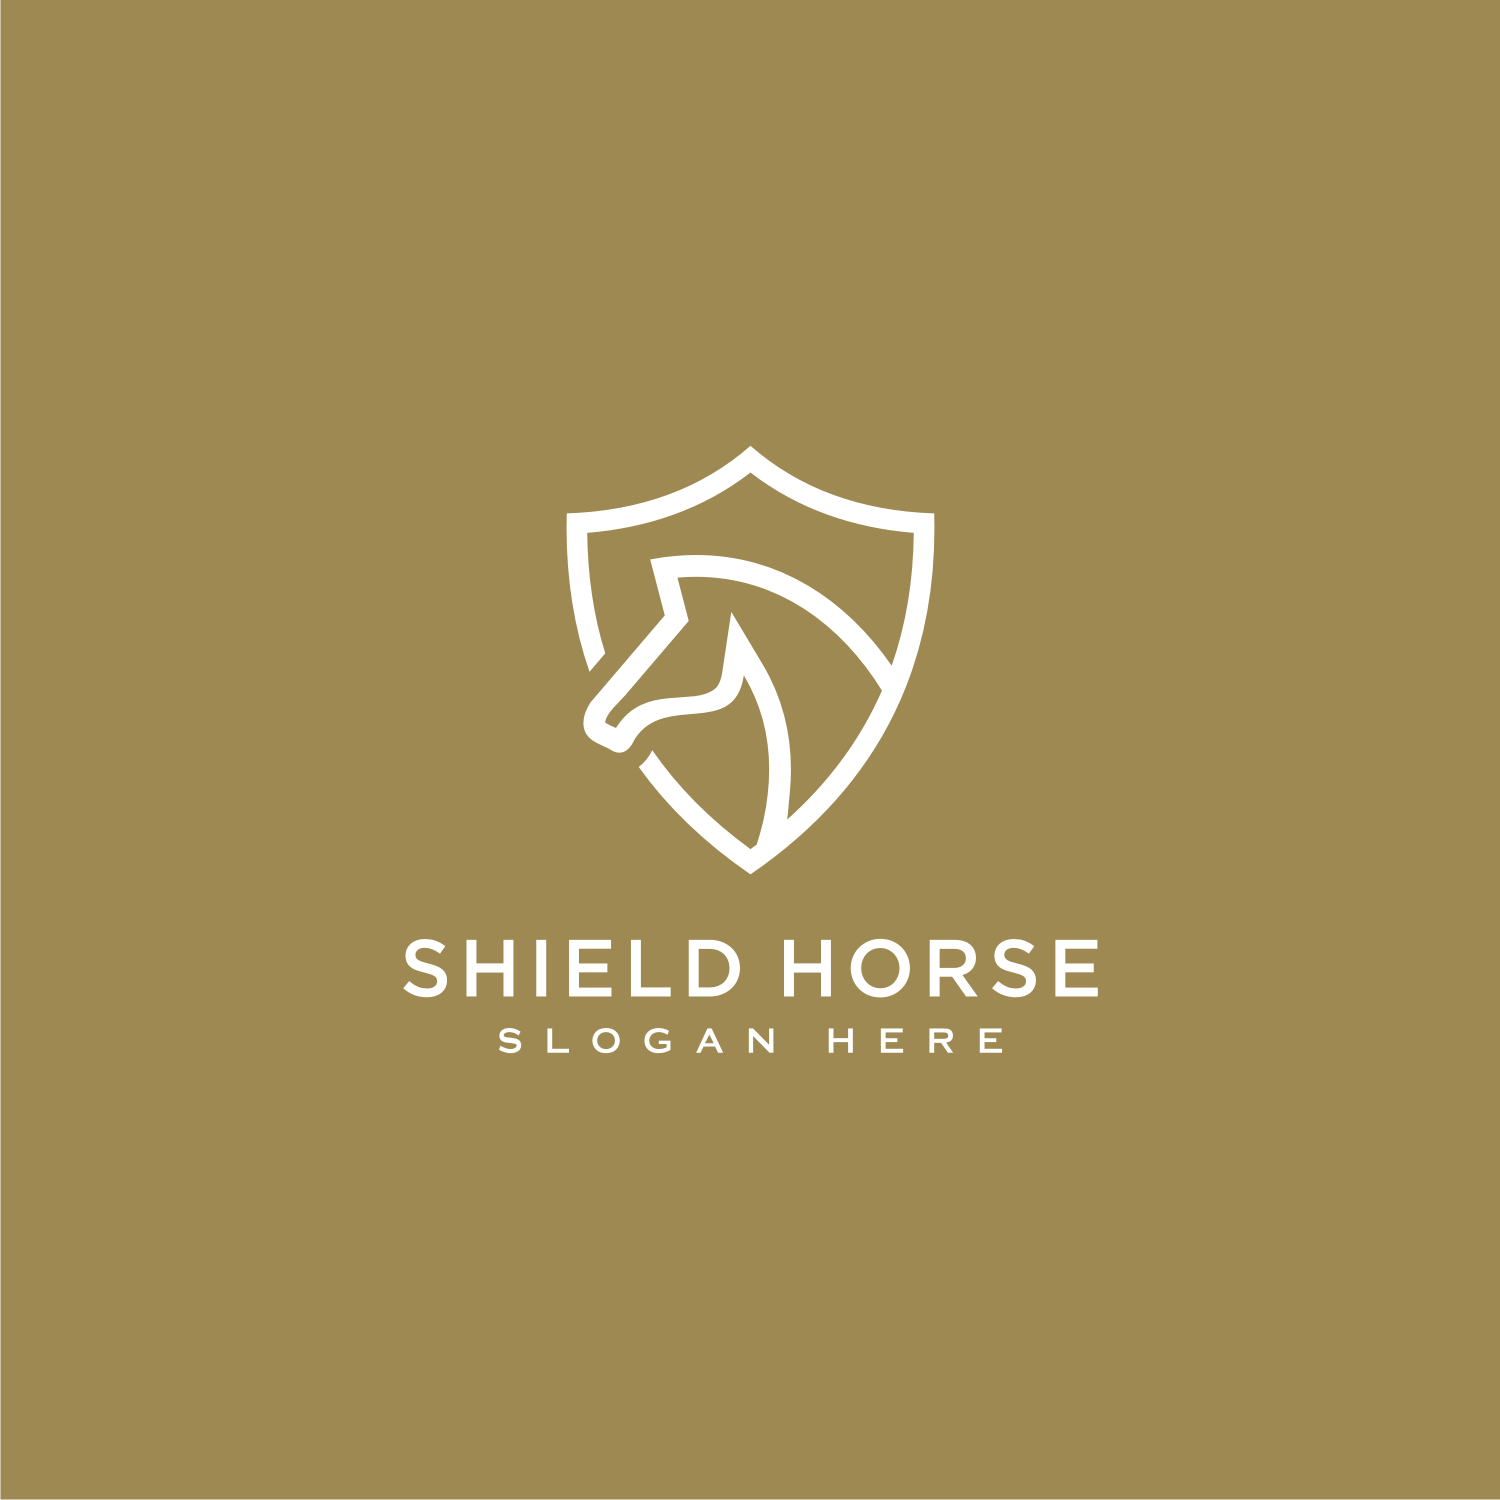 2 Head Horse And Shield Logo Vector Outline Example.